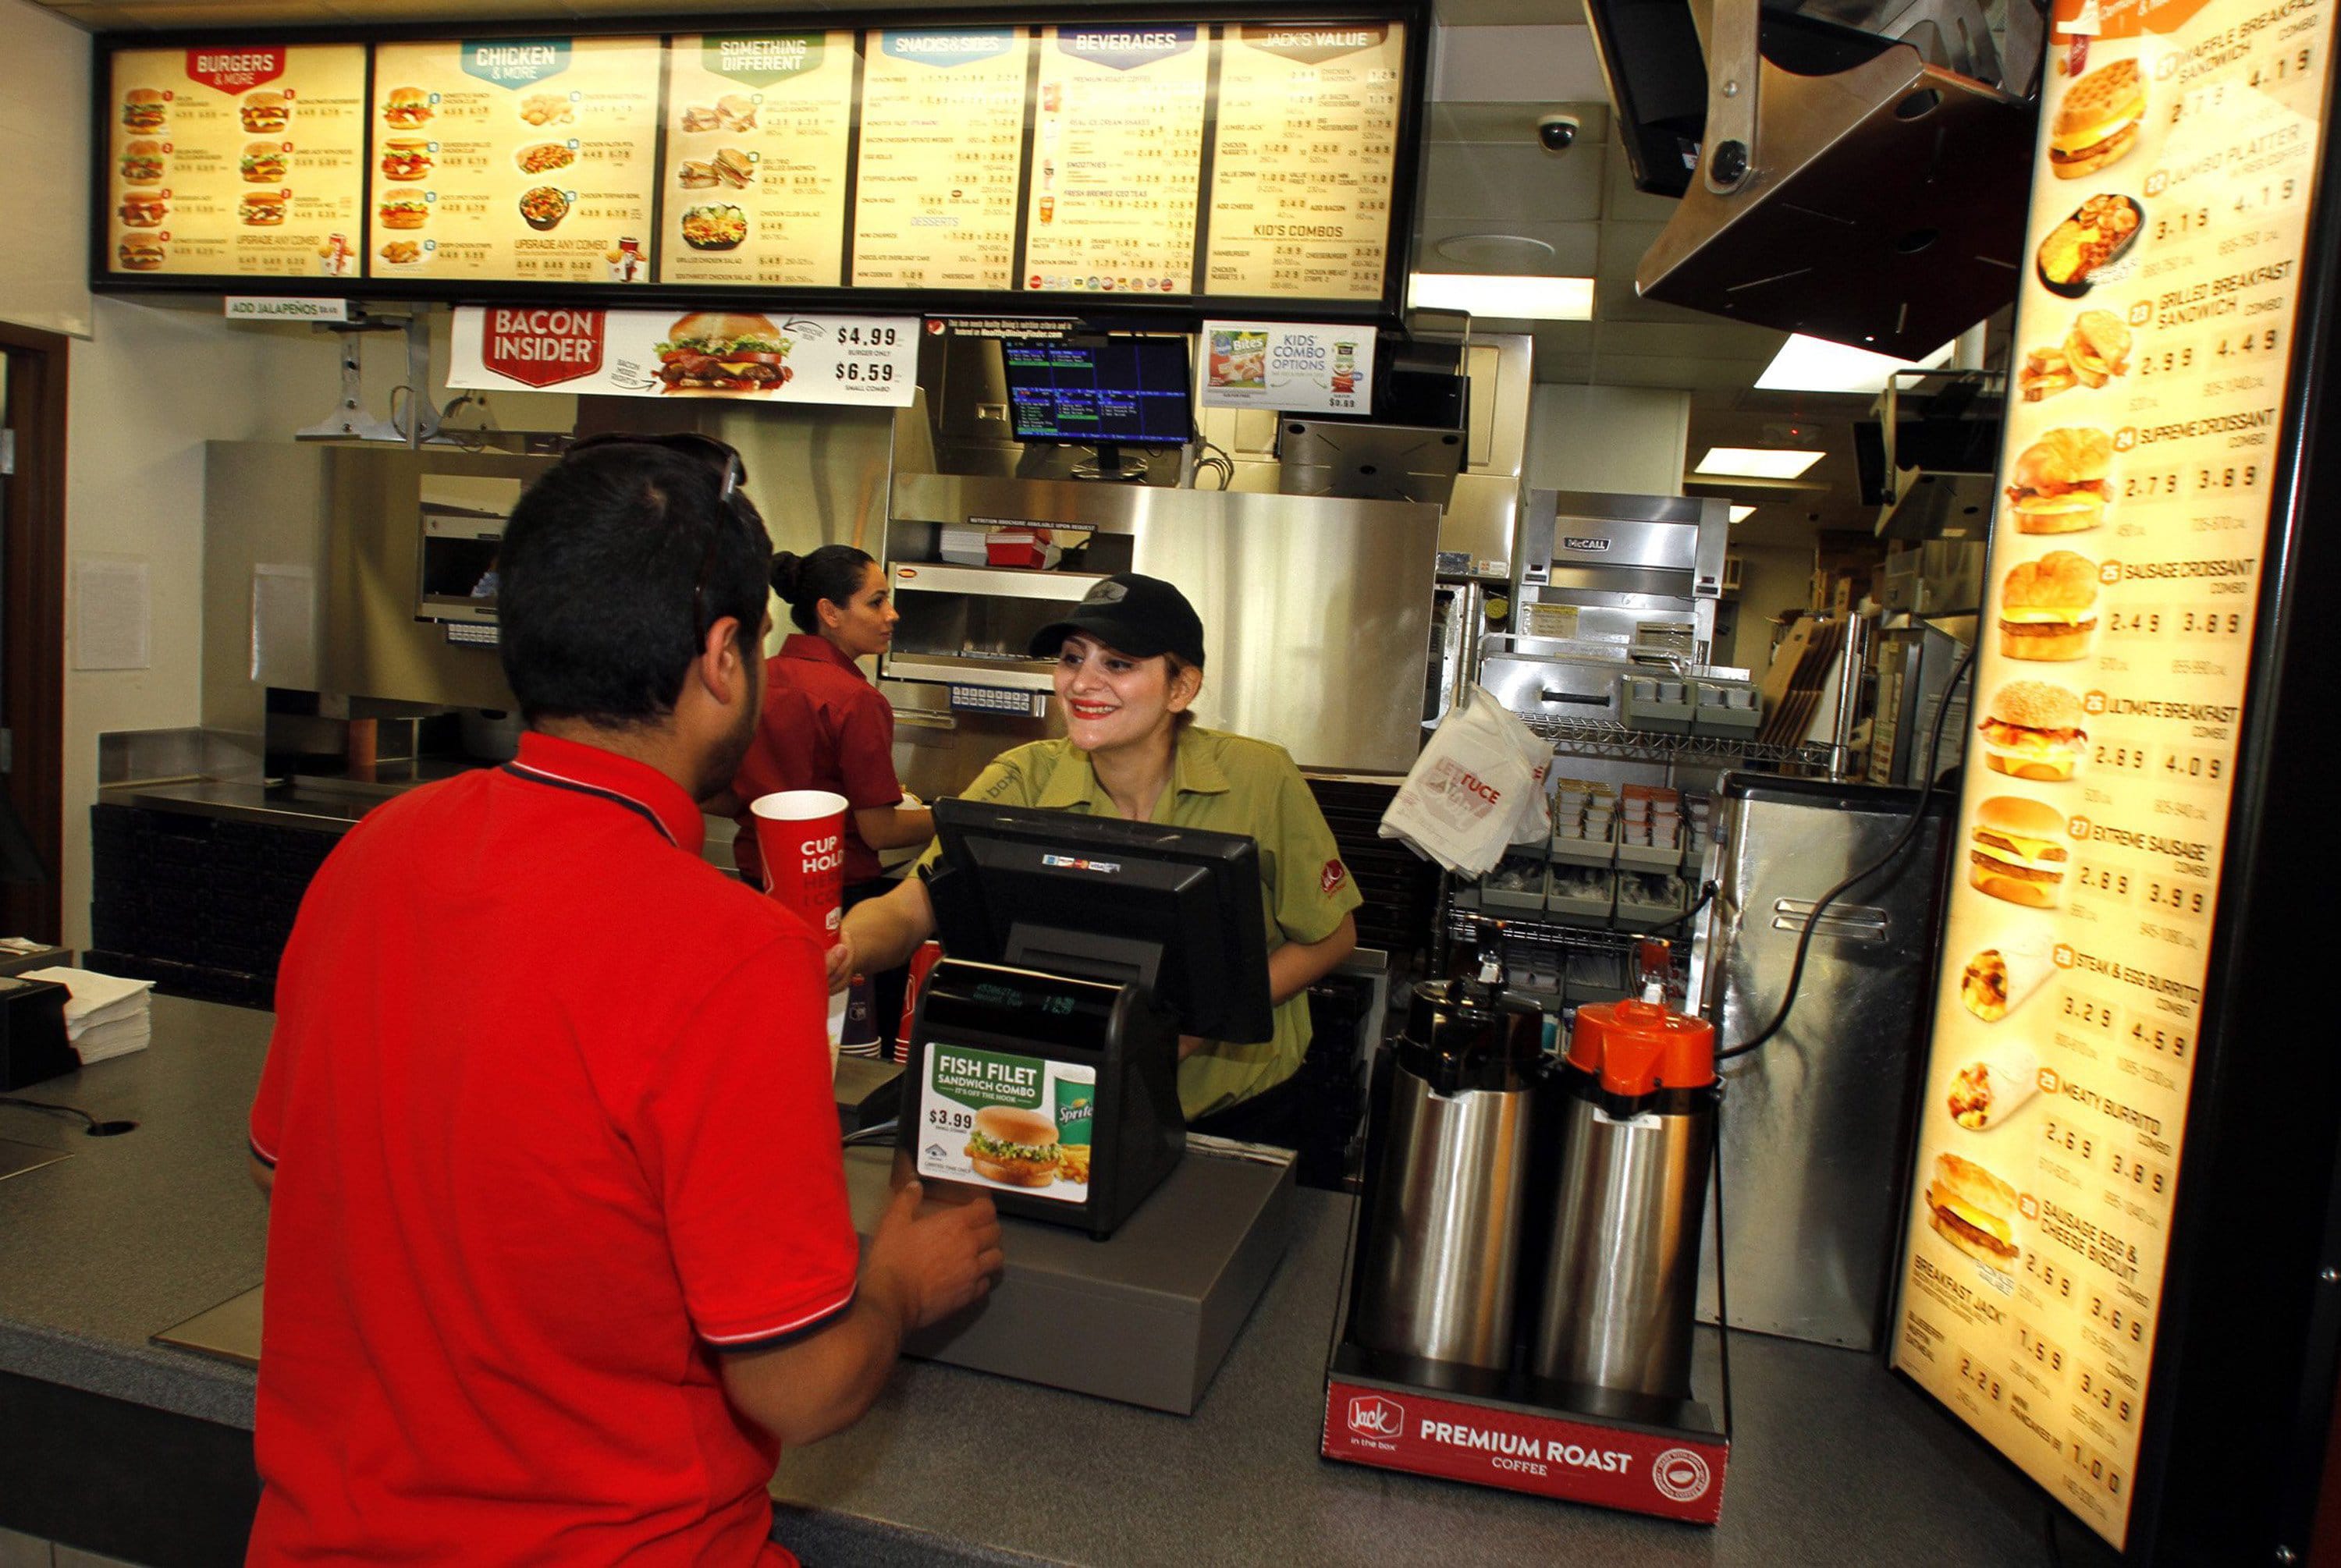 A customer orders food during lunchtime at a Jack in the Box restaurant in Irvine, Calif., on April 8.